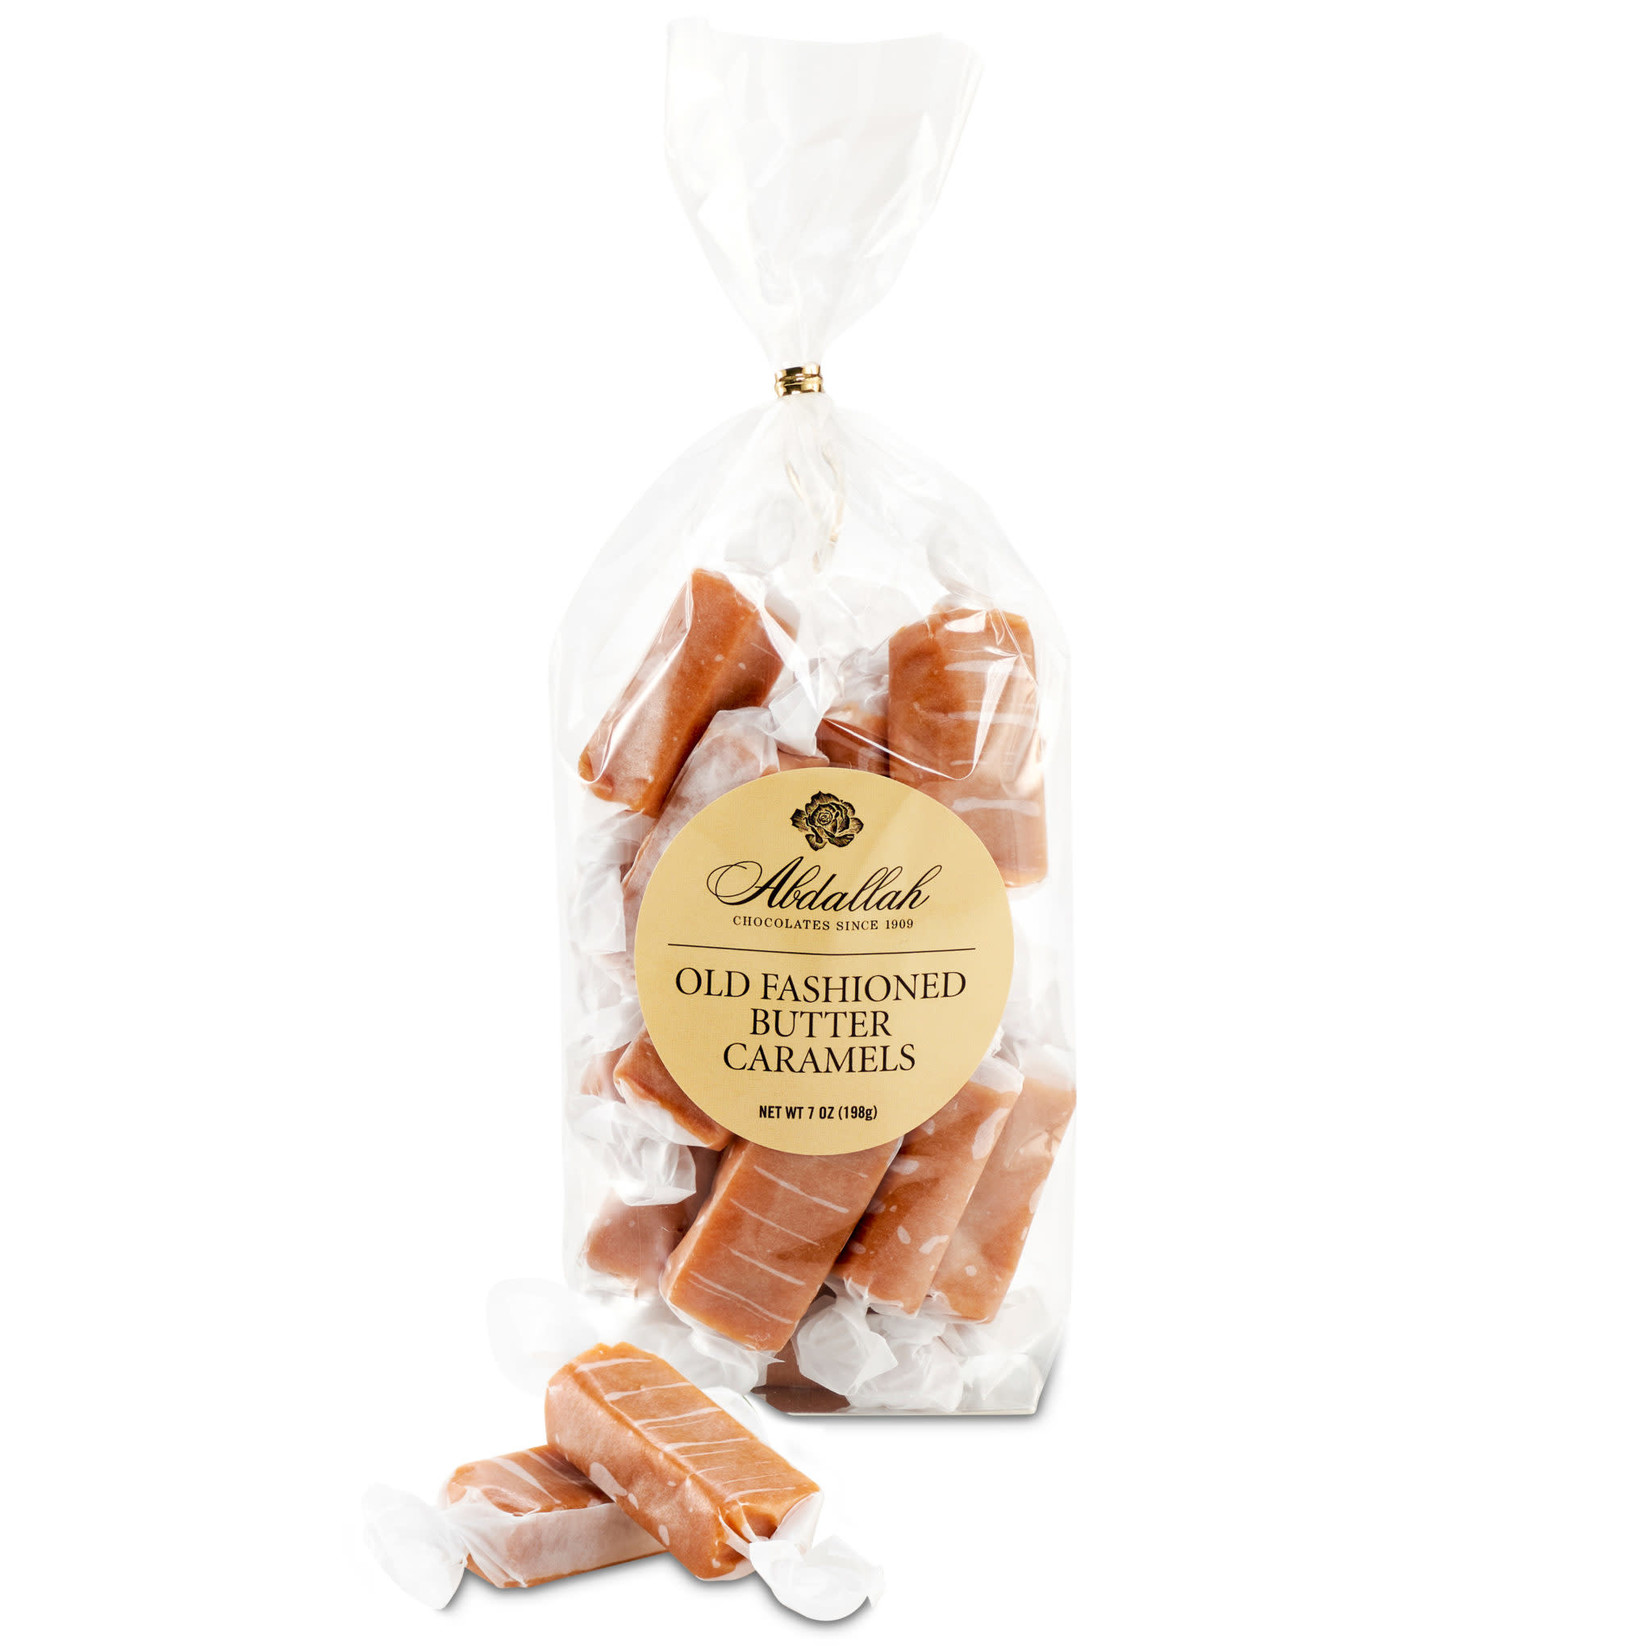 Abdallah Abdallah Old Fashioned Butter Caramels 7 oz